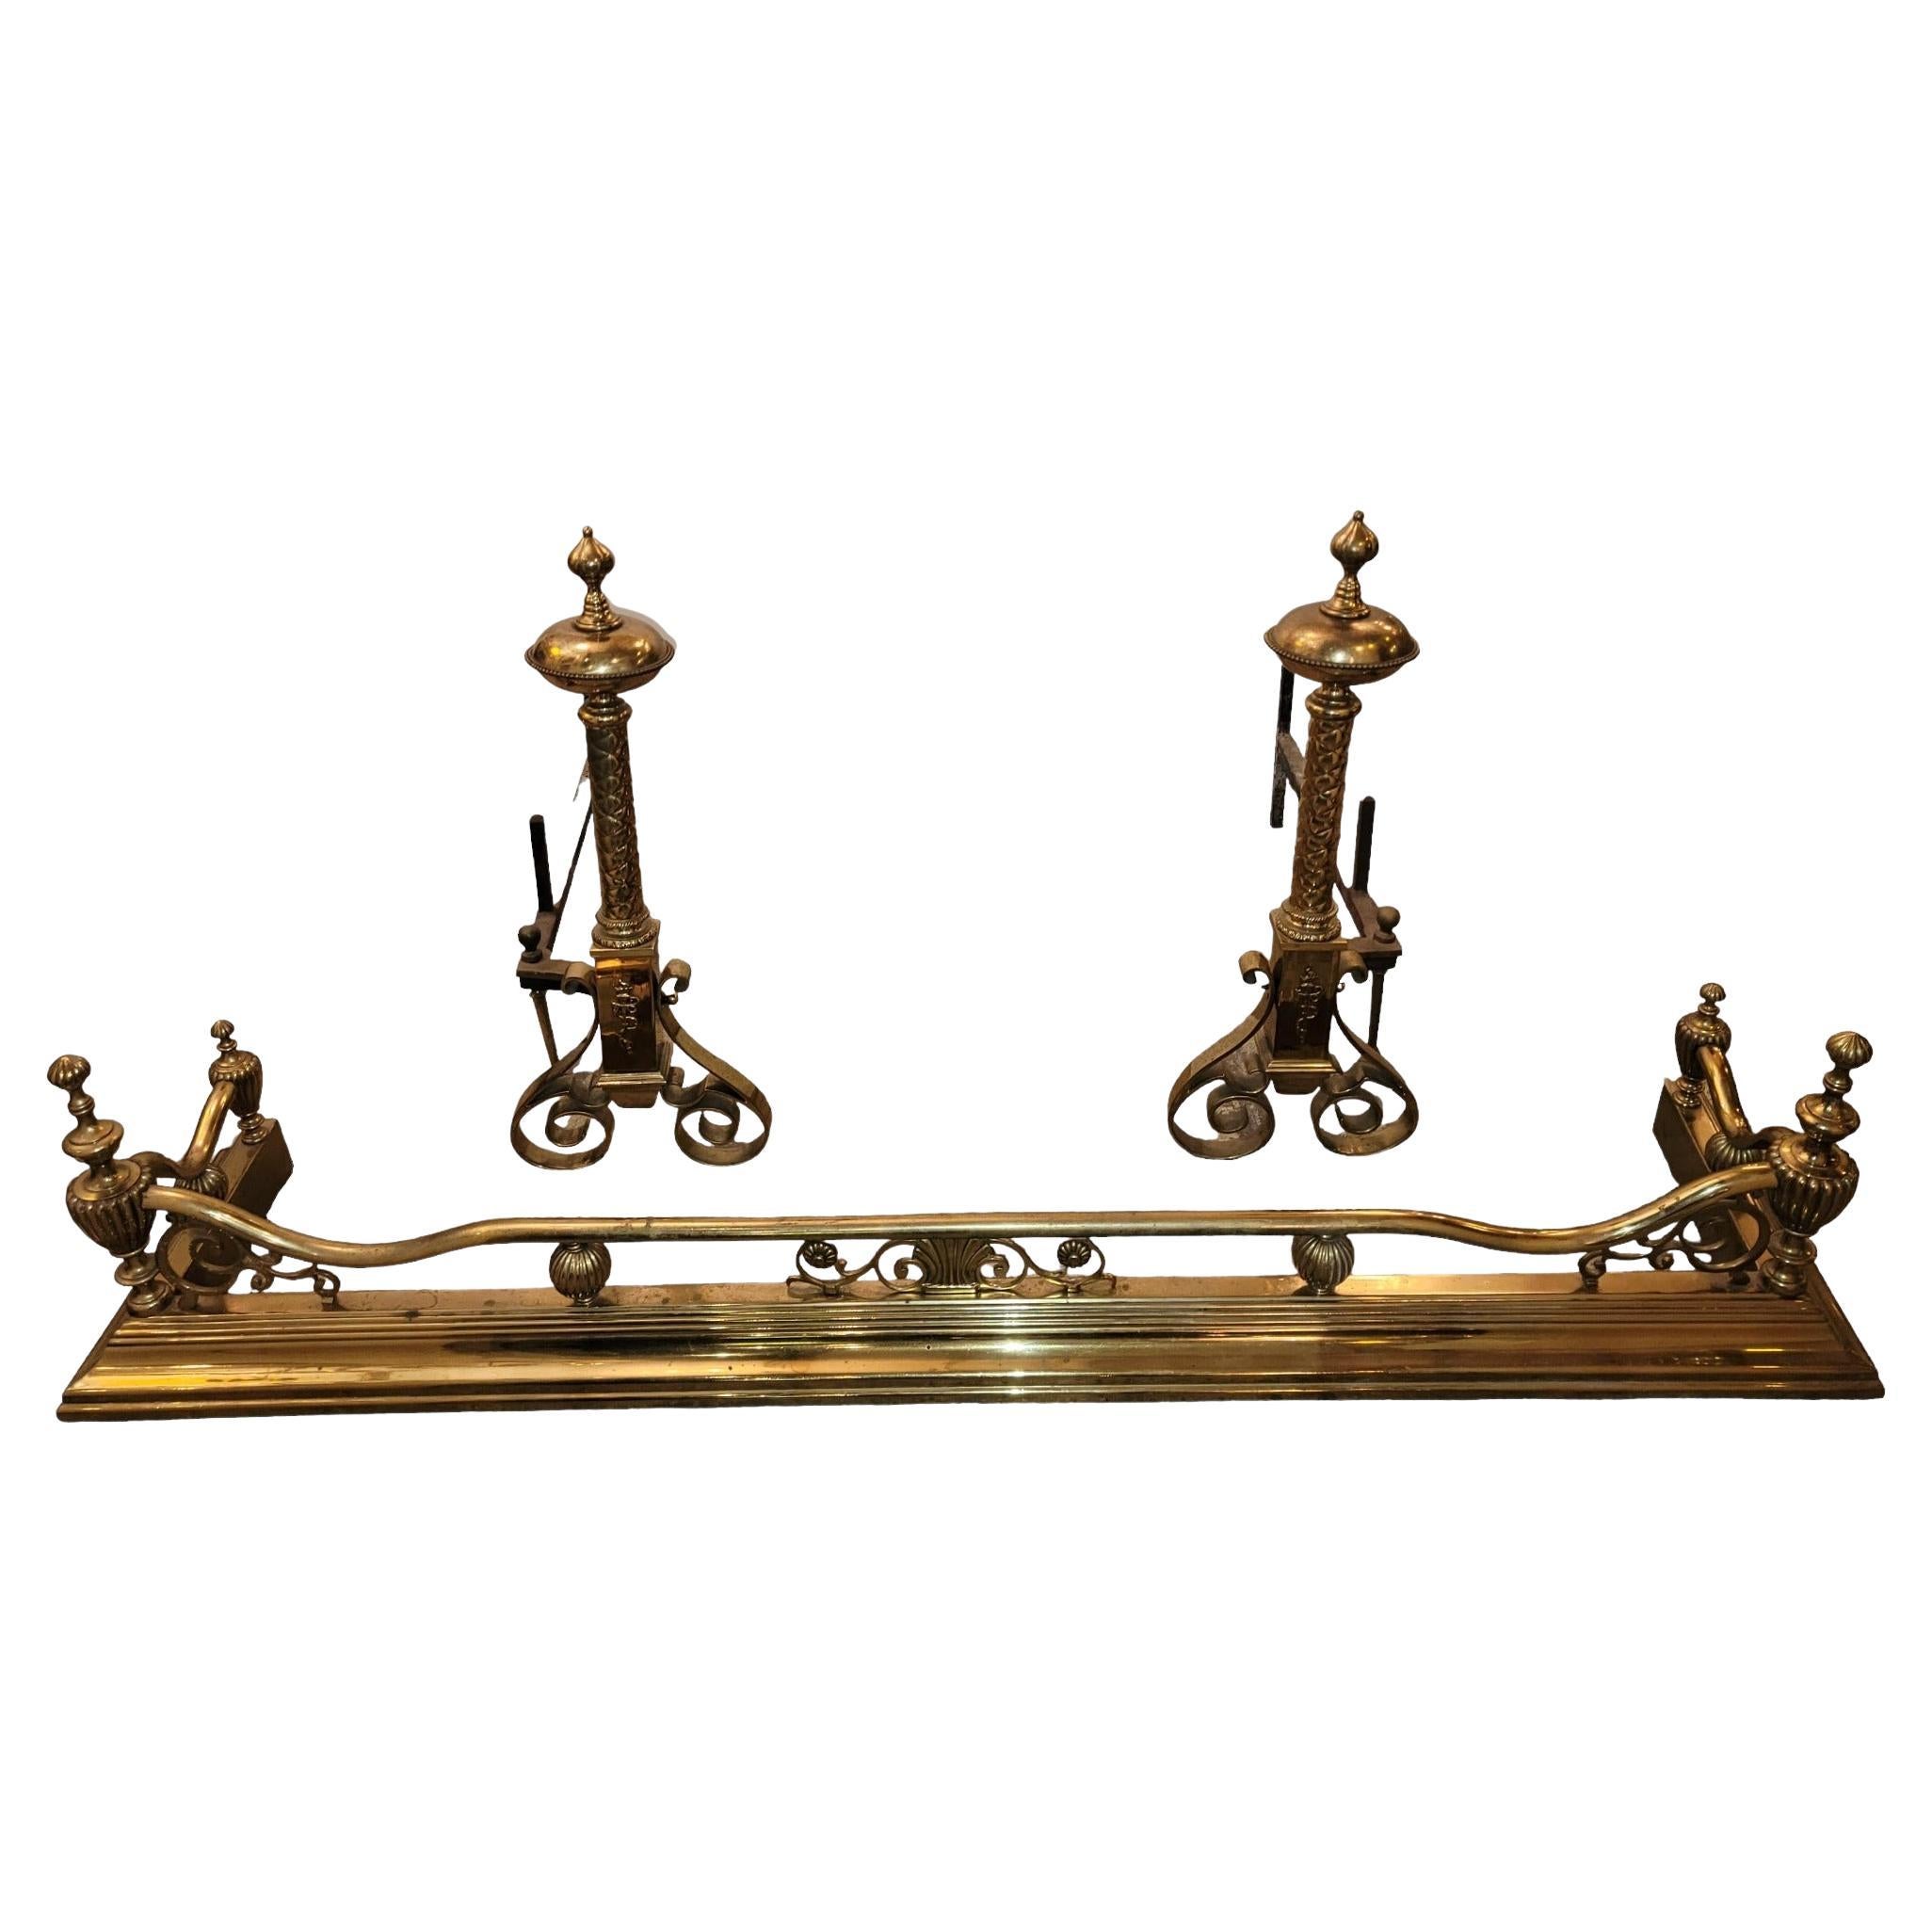 Early 20th Century Italian Fireplace Andiron and Chenet, 3 Piece Set